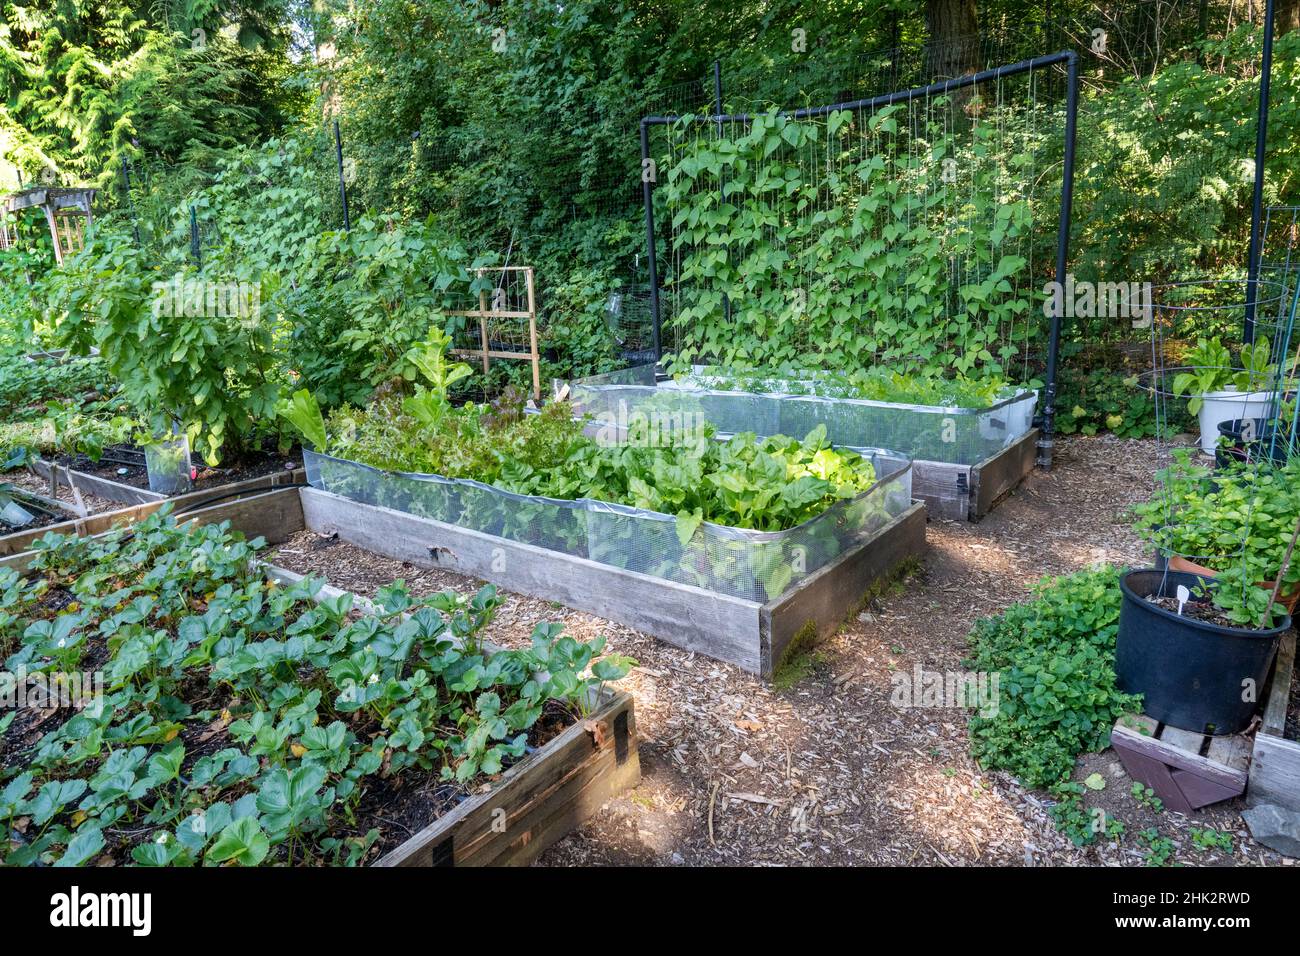 Raised garden beds in a community garden containing strawberries, Chioggia beets, lettuce and pole beans. (PR) Stock Photo